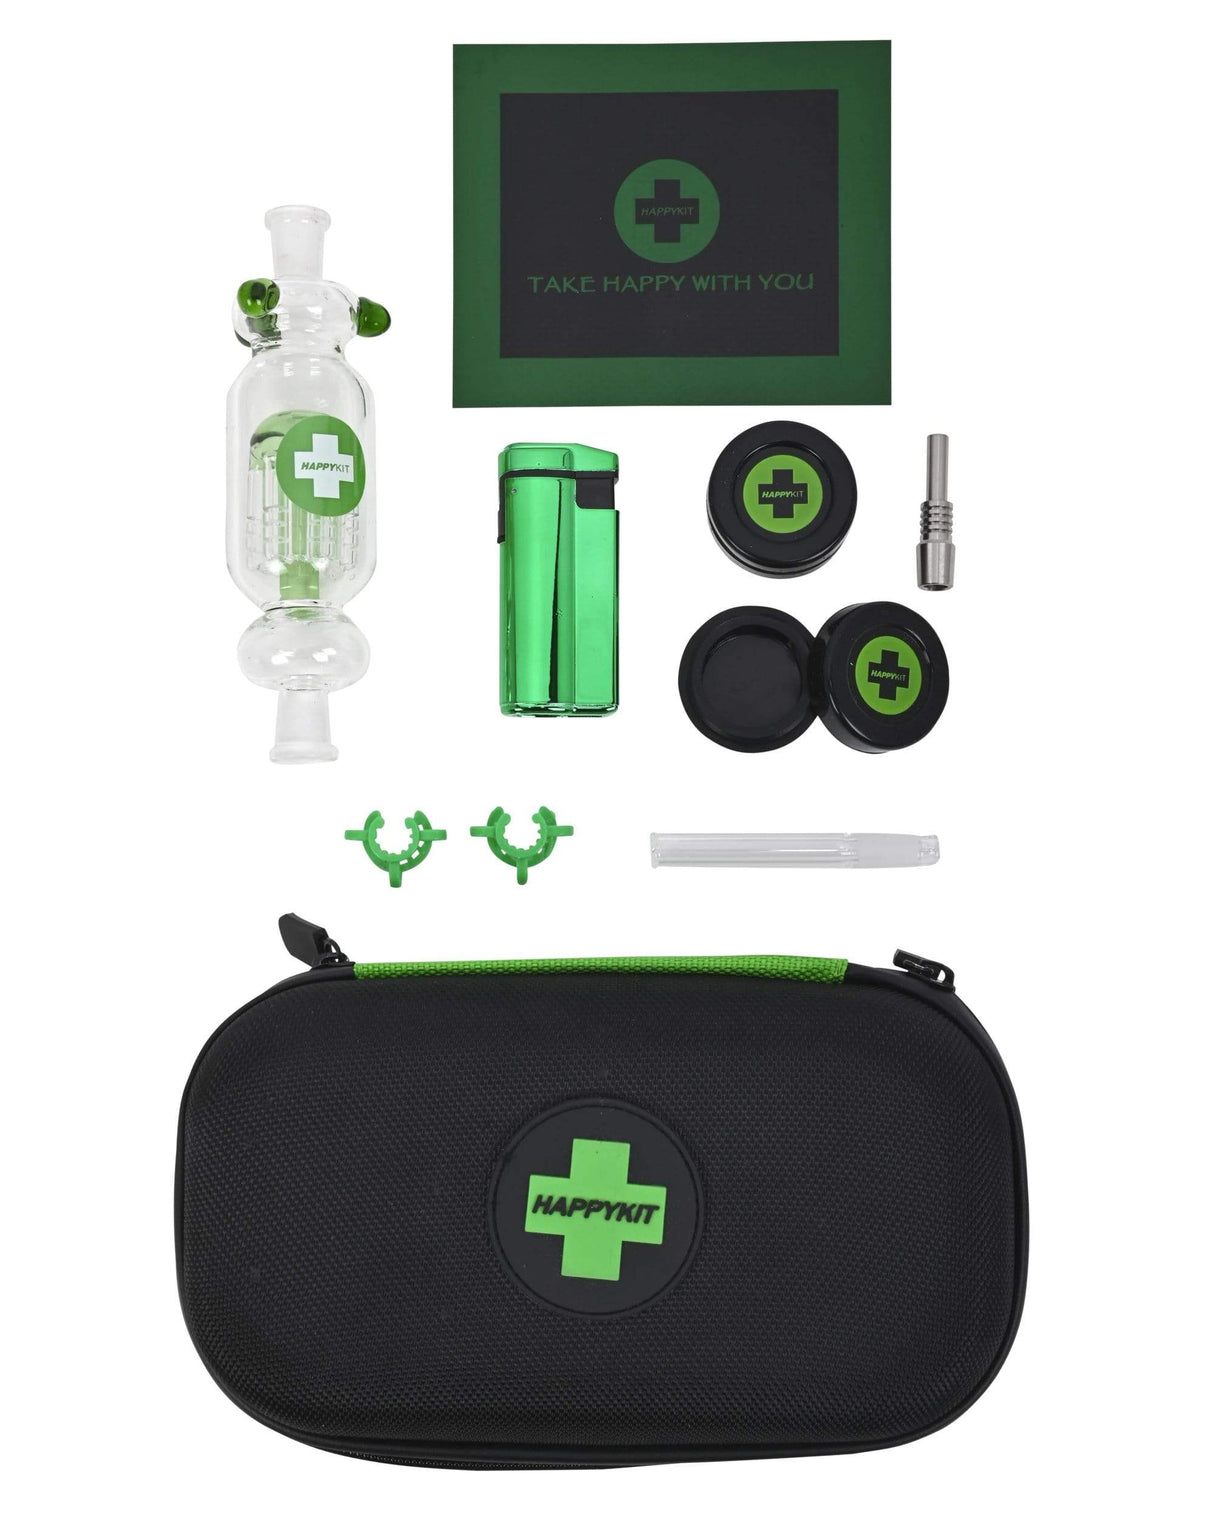 The Very Happy Dab Kit by Happy Kit in black with glass bong, lighter, silicone containers, and case